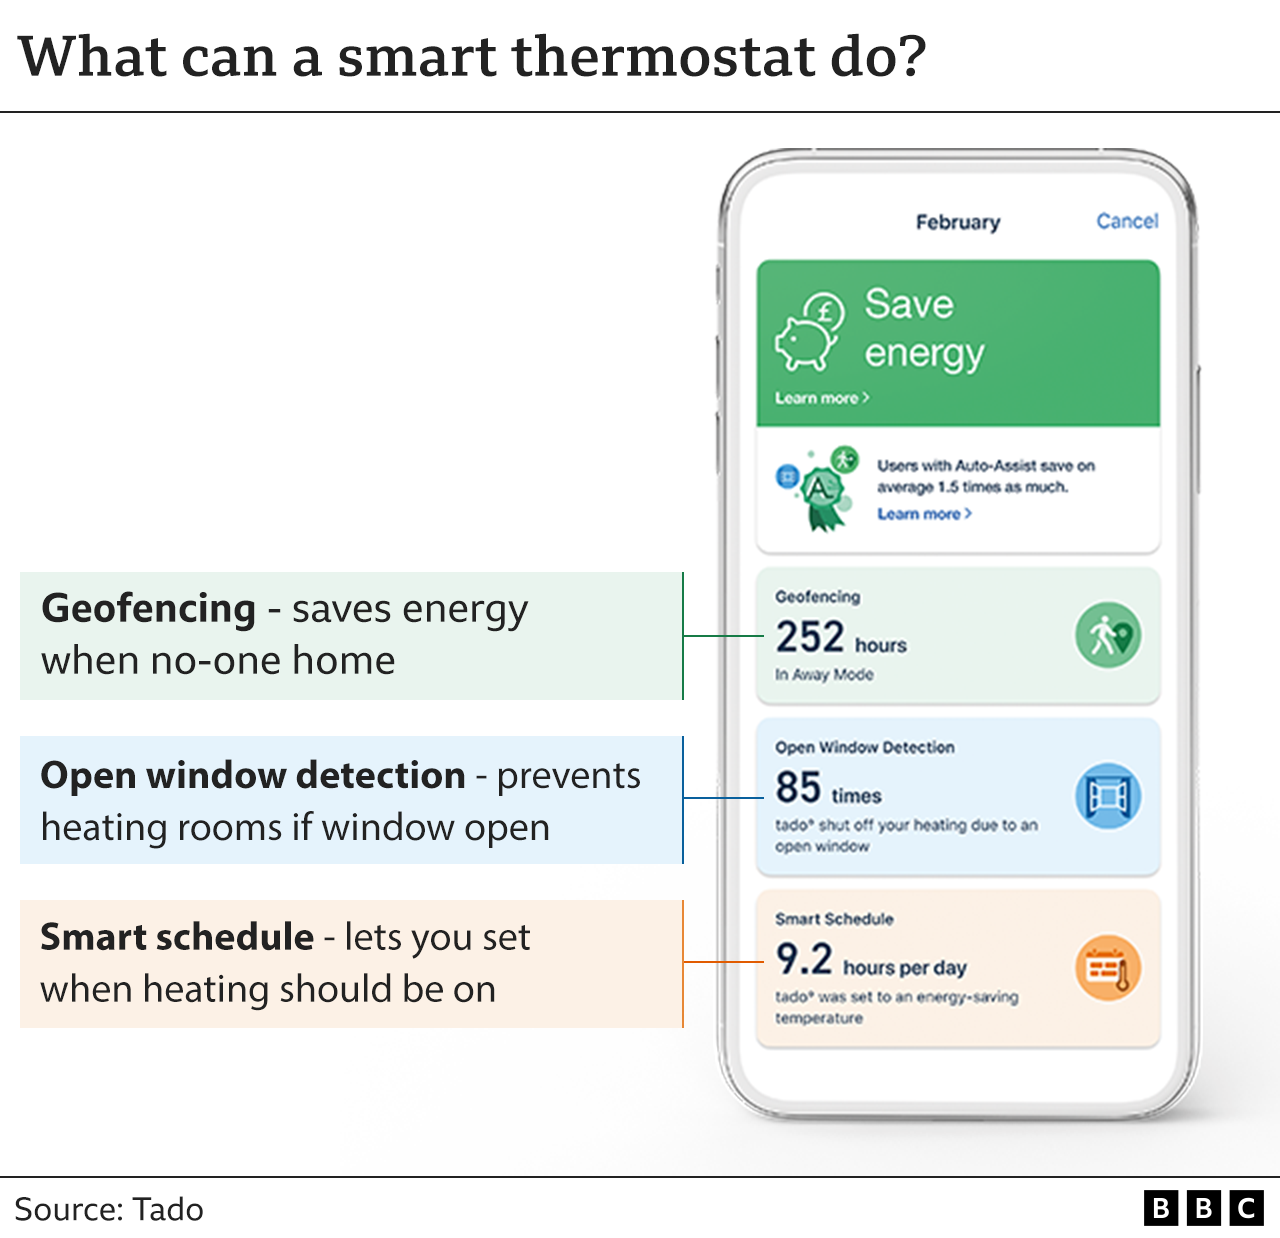 What can a smart thermostat do?